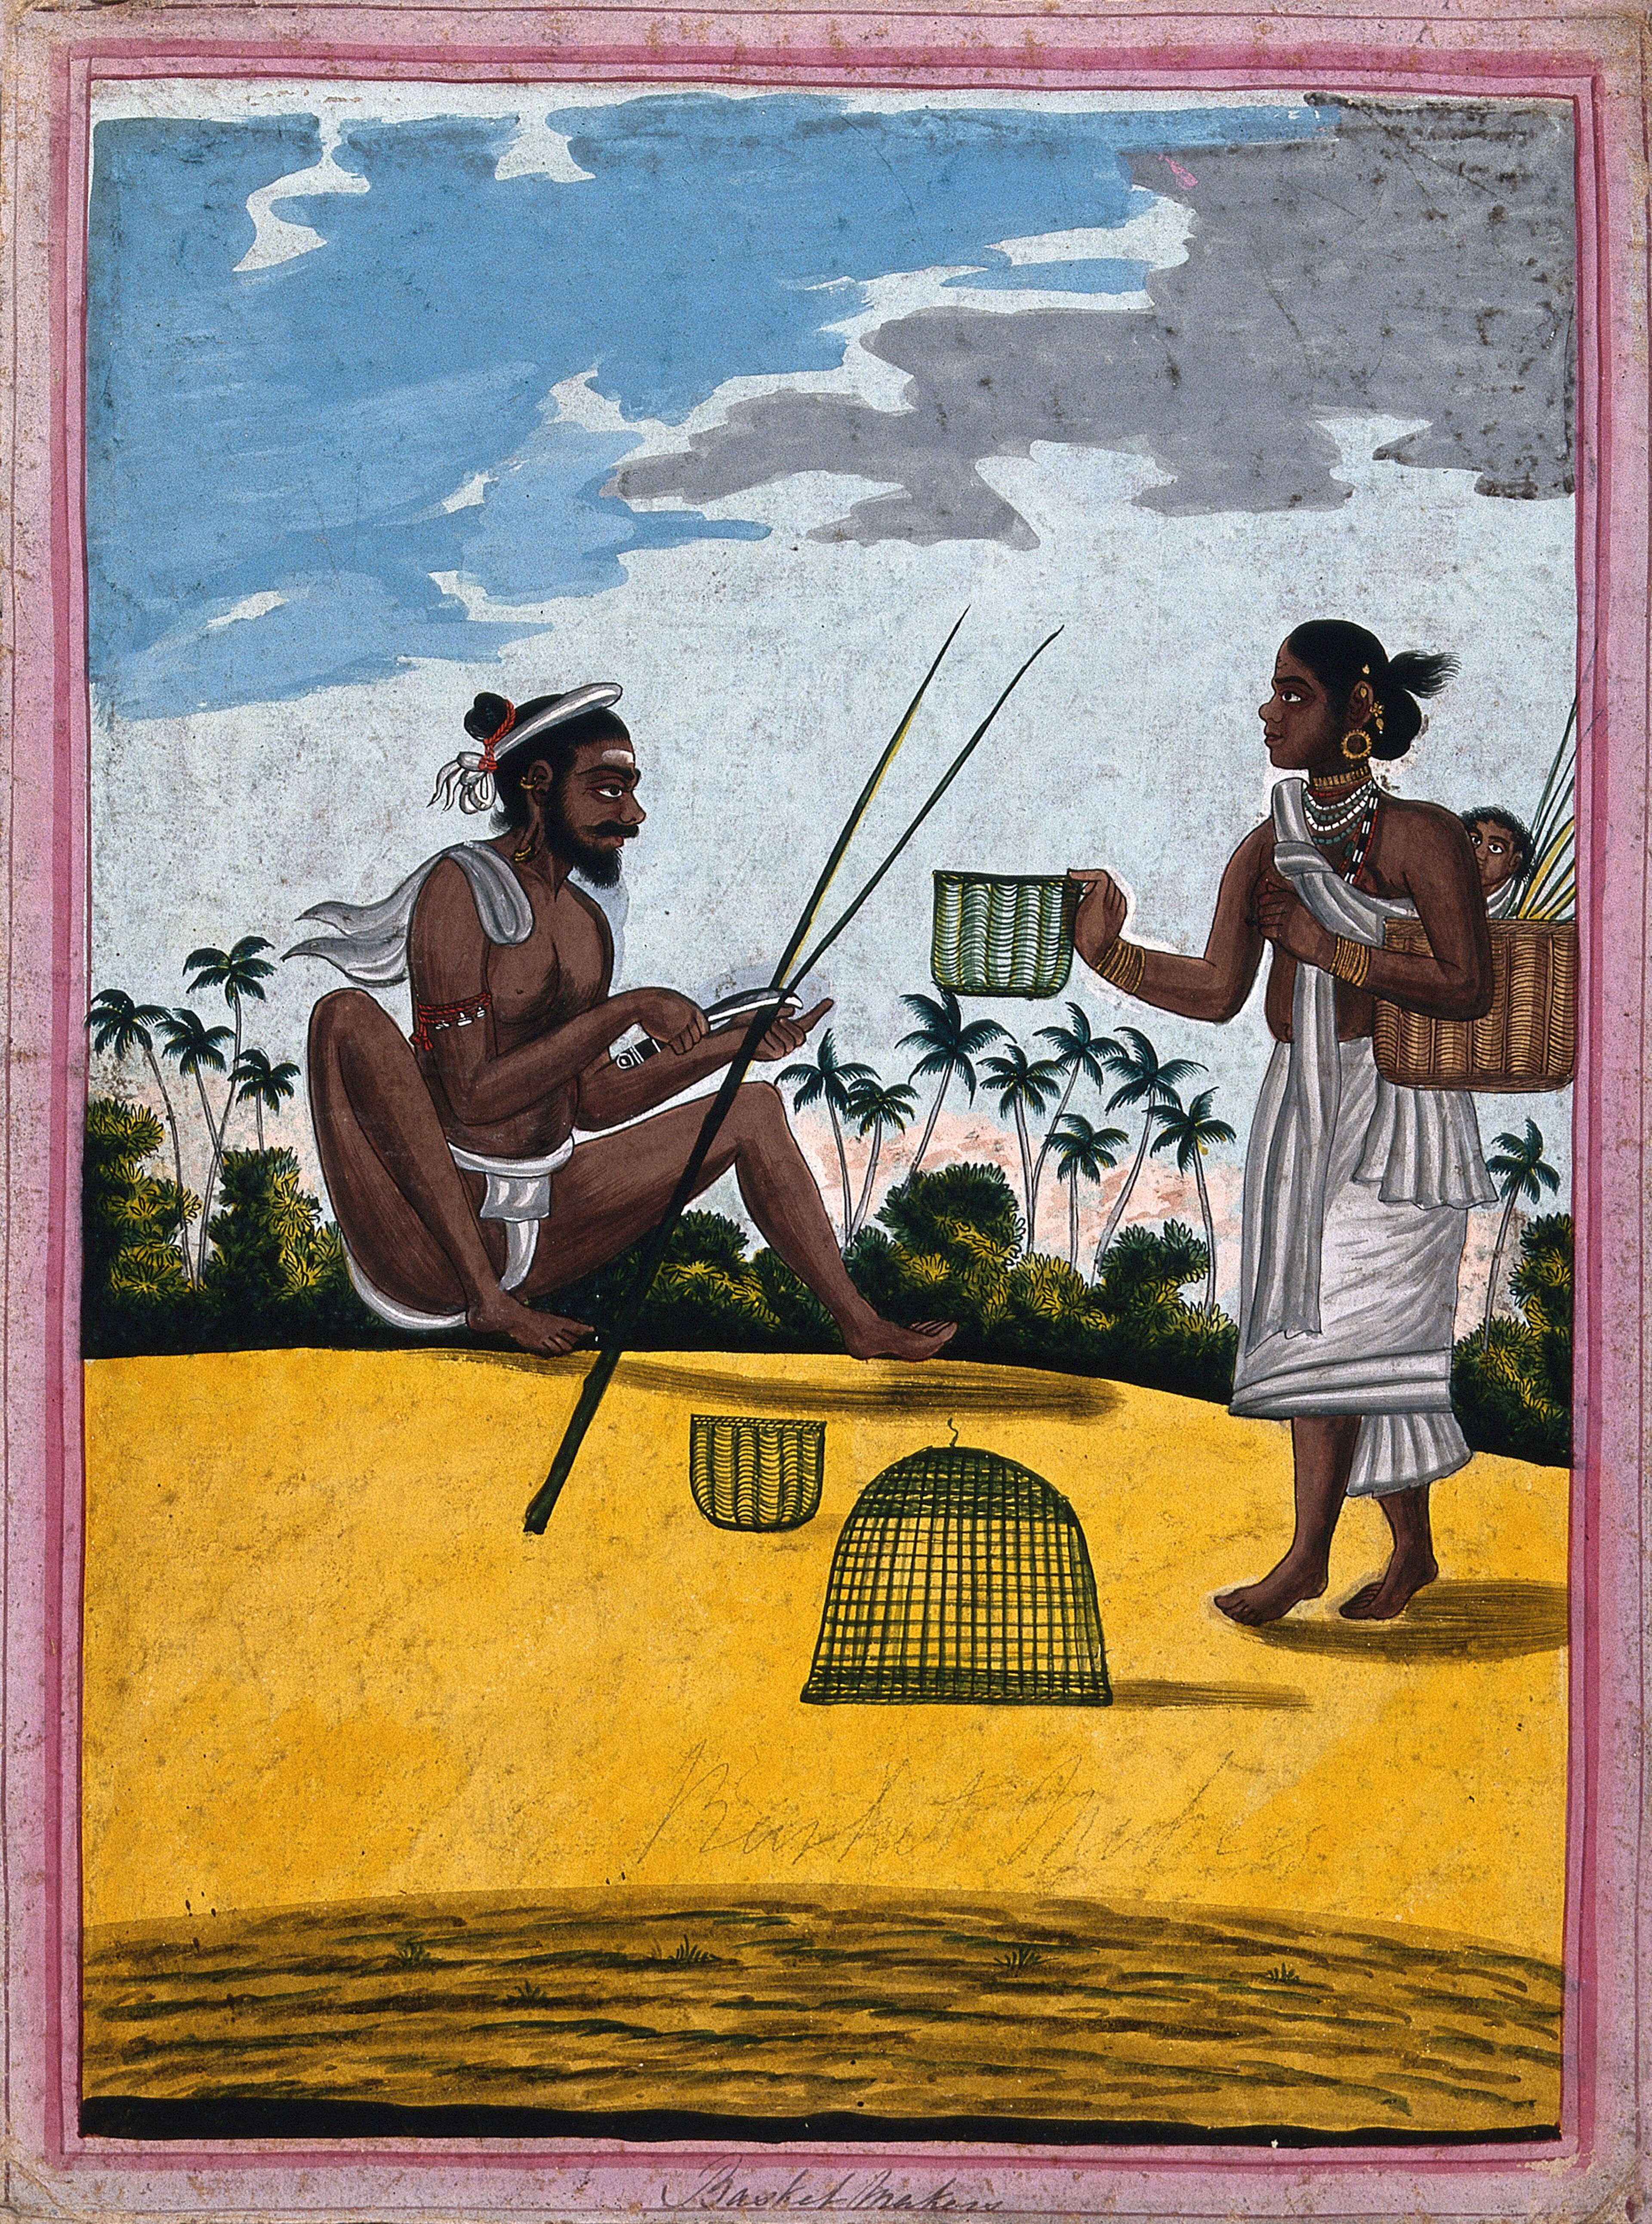 Hindu basket maker and wife. Gouache drawing.